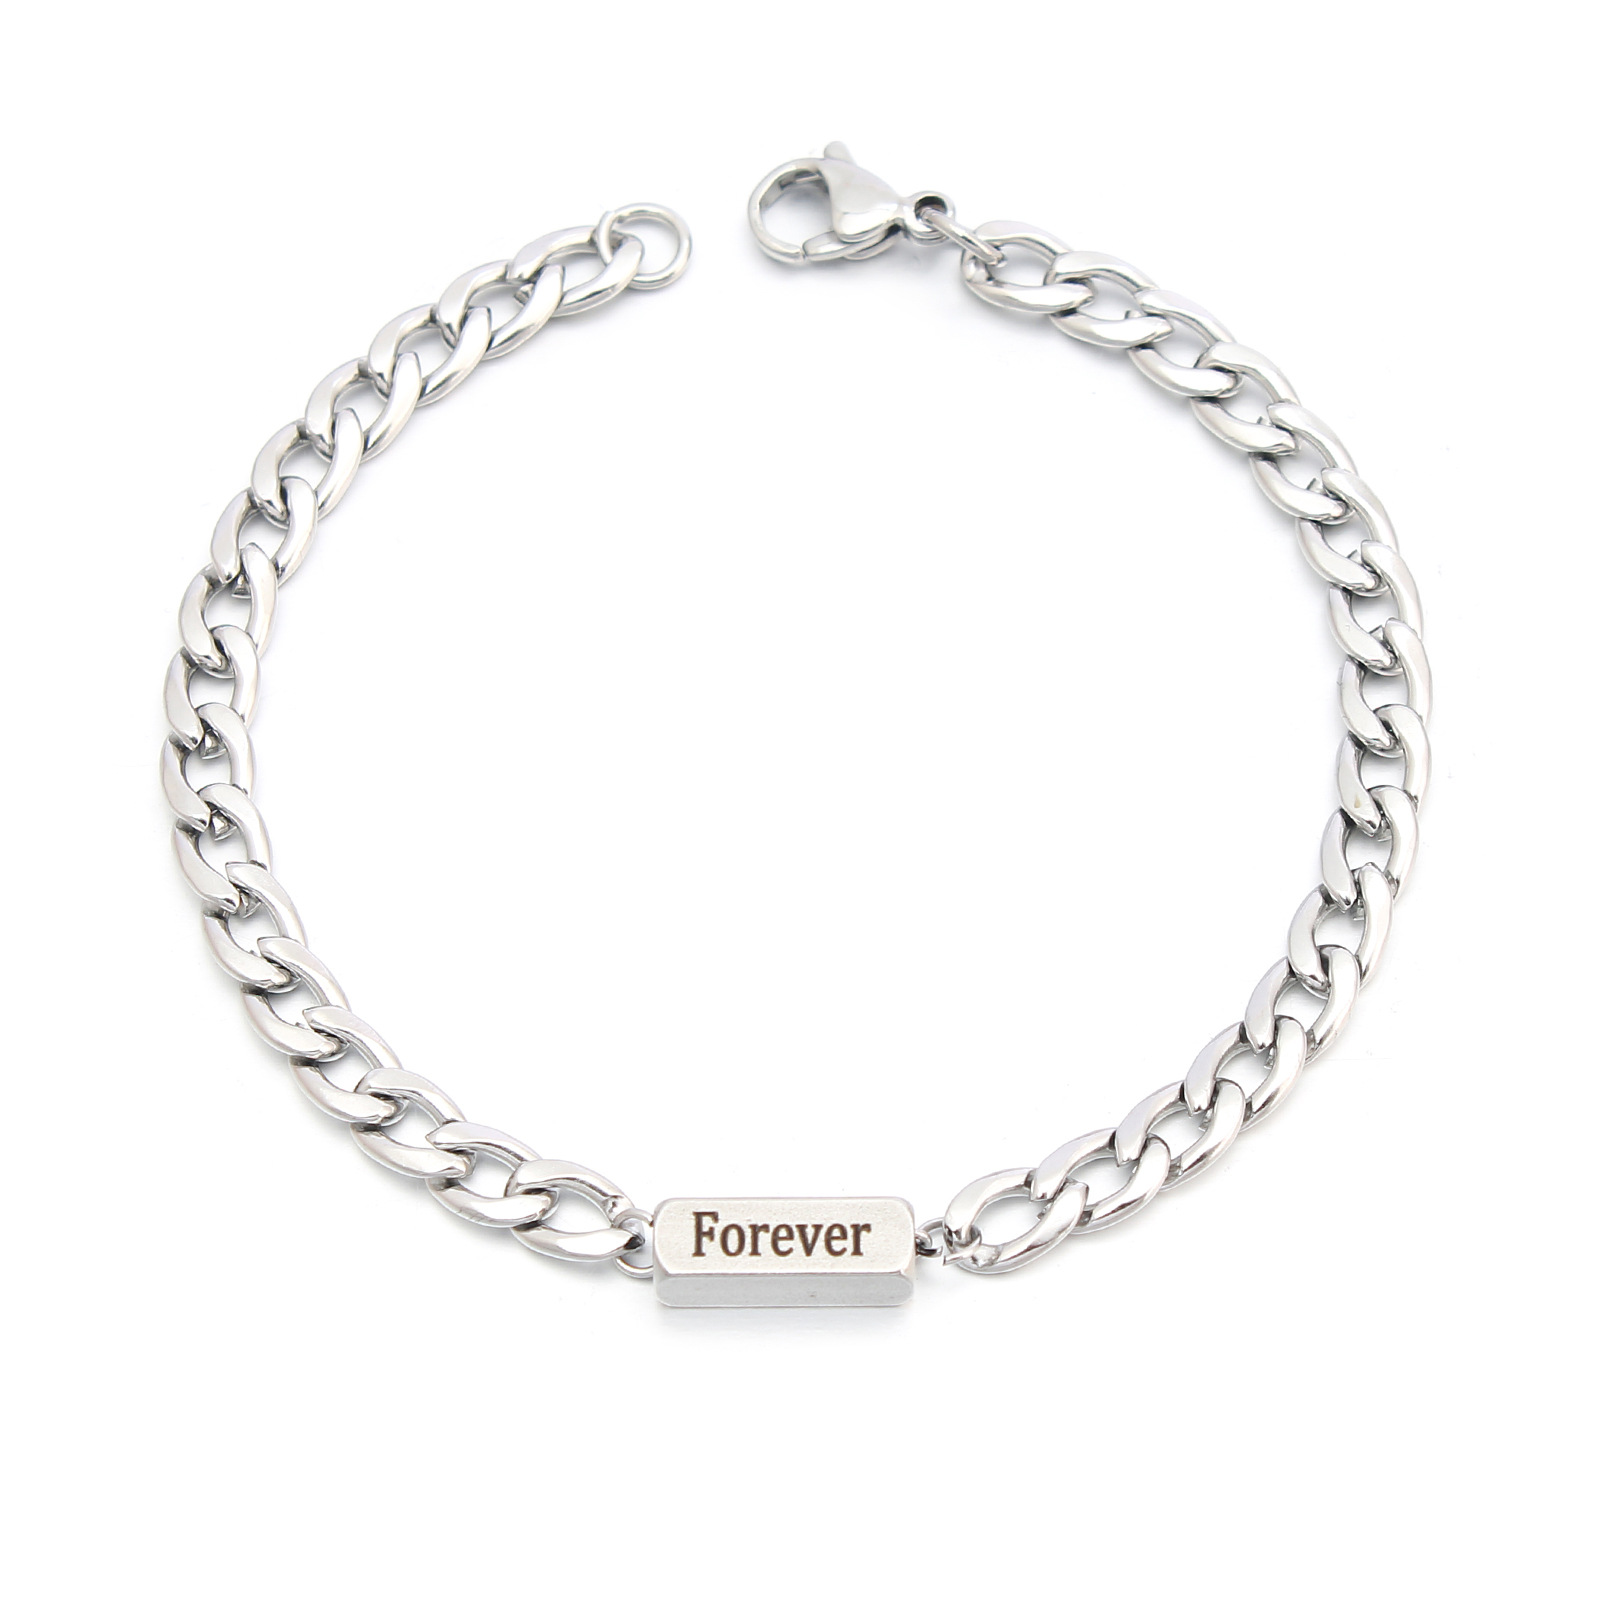 Foreve engraved Cuban chain single